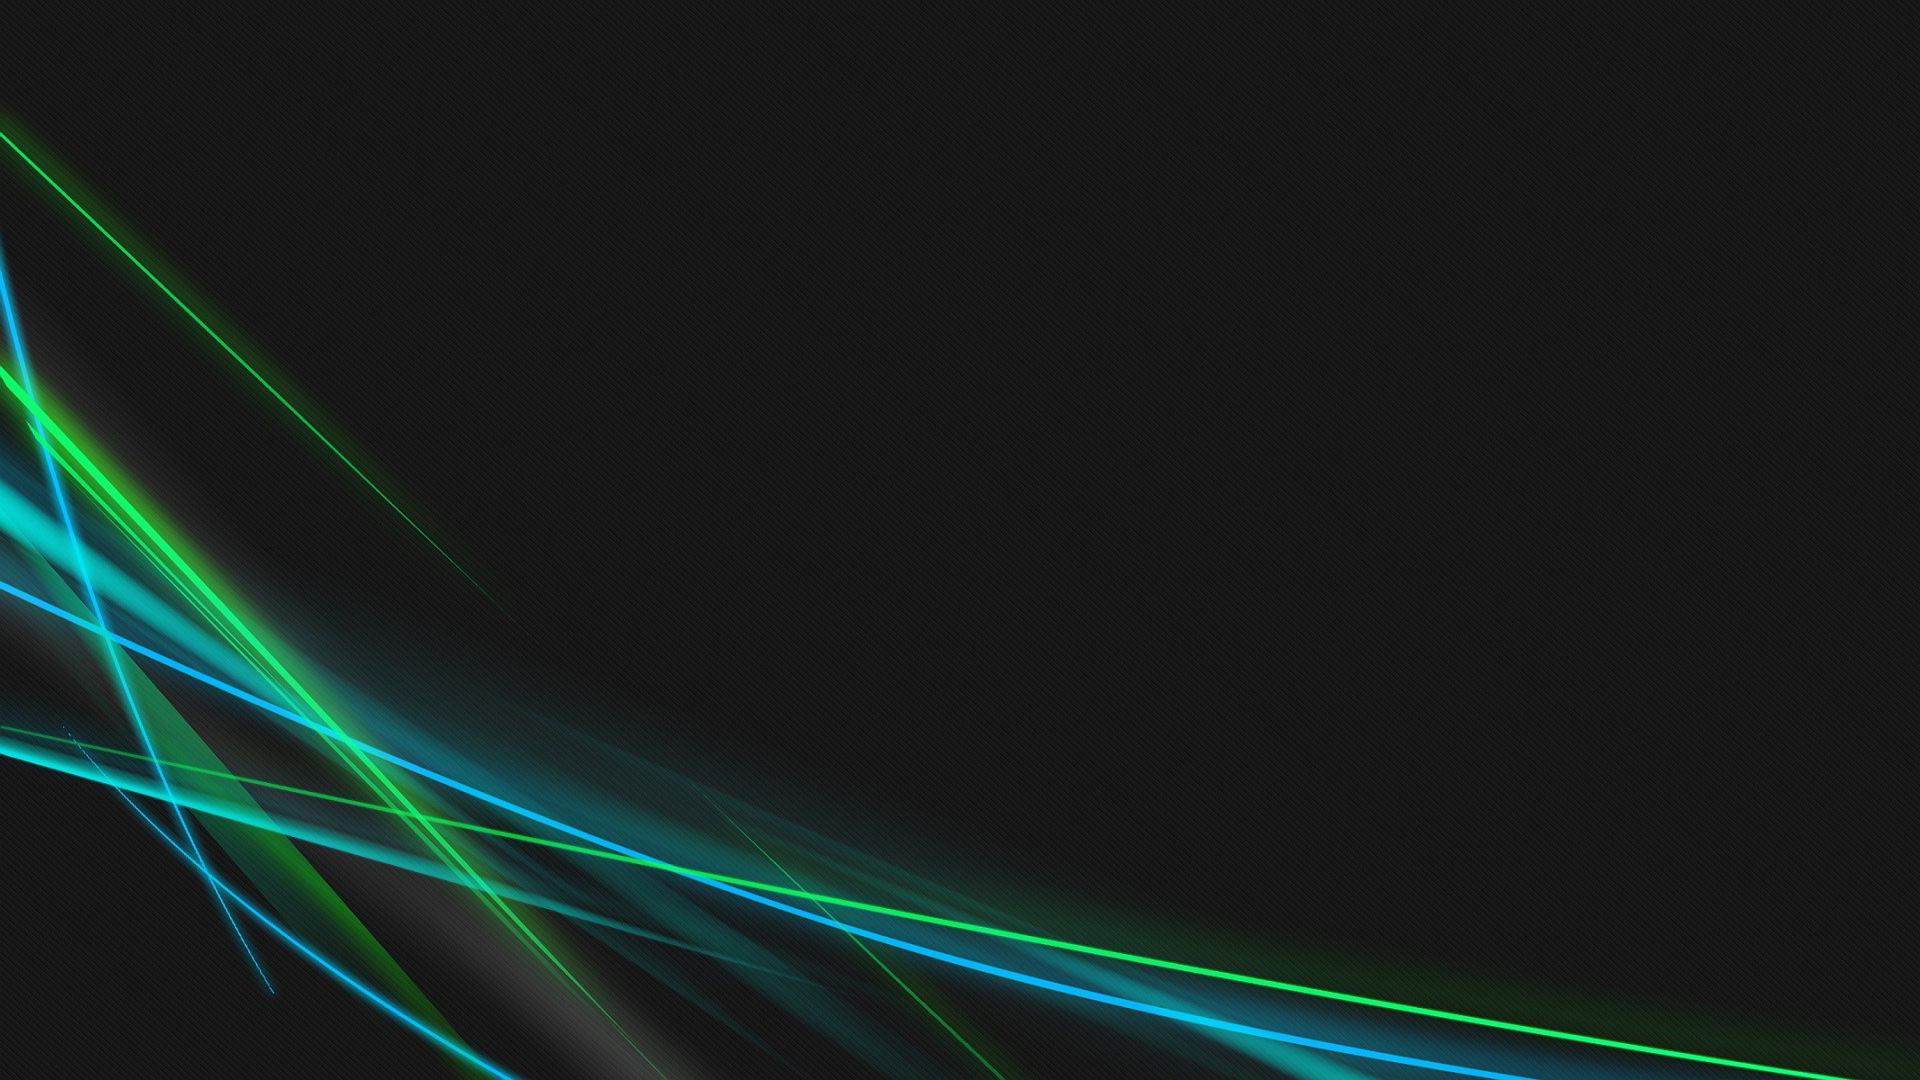 1920x1080 green neon wallpaper download free download free high definition smart  phones pictures widescreen display digital photos 1920Ã1080 Wallpaper HD